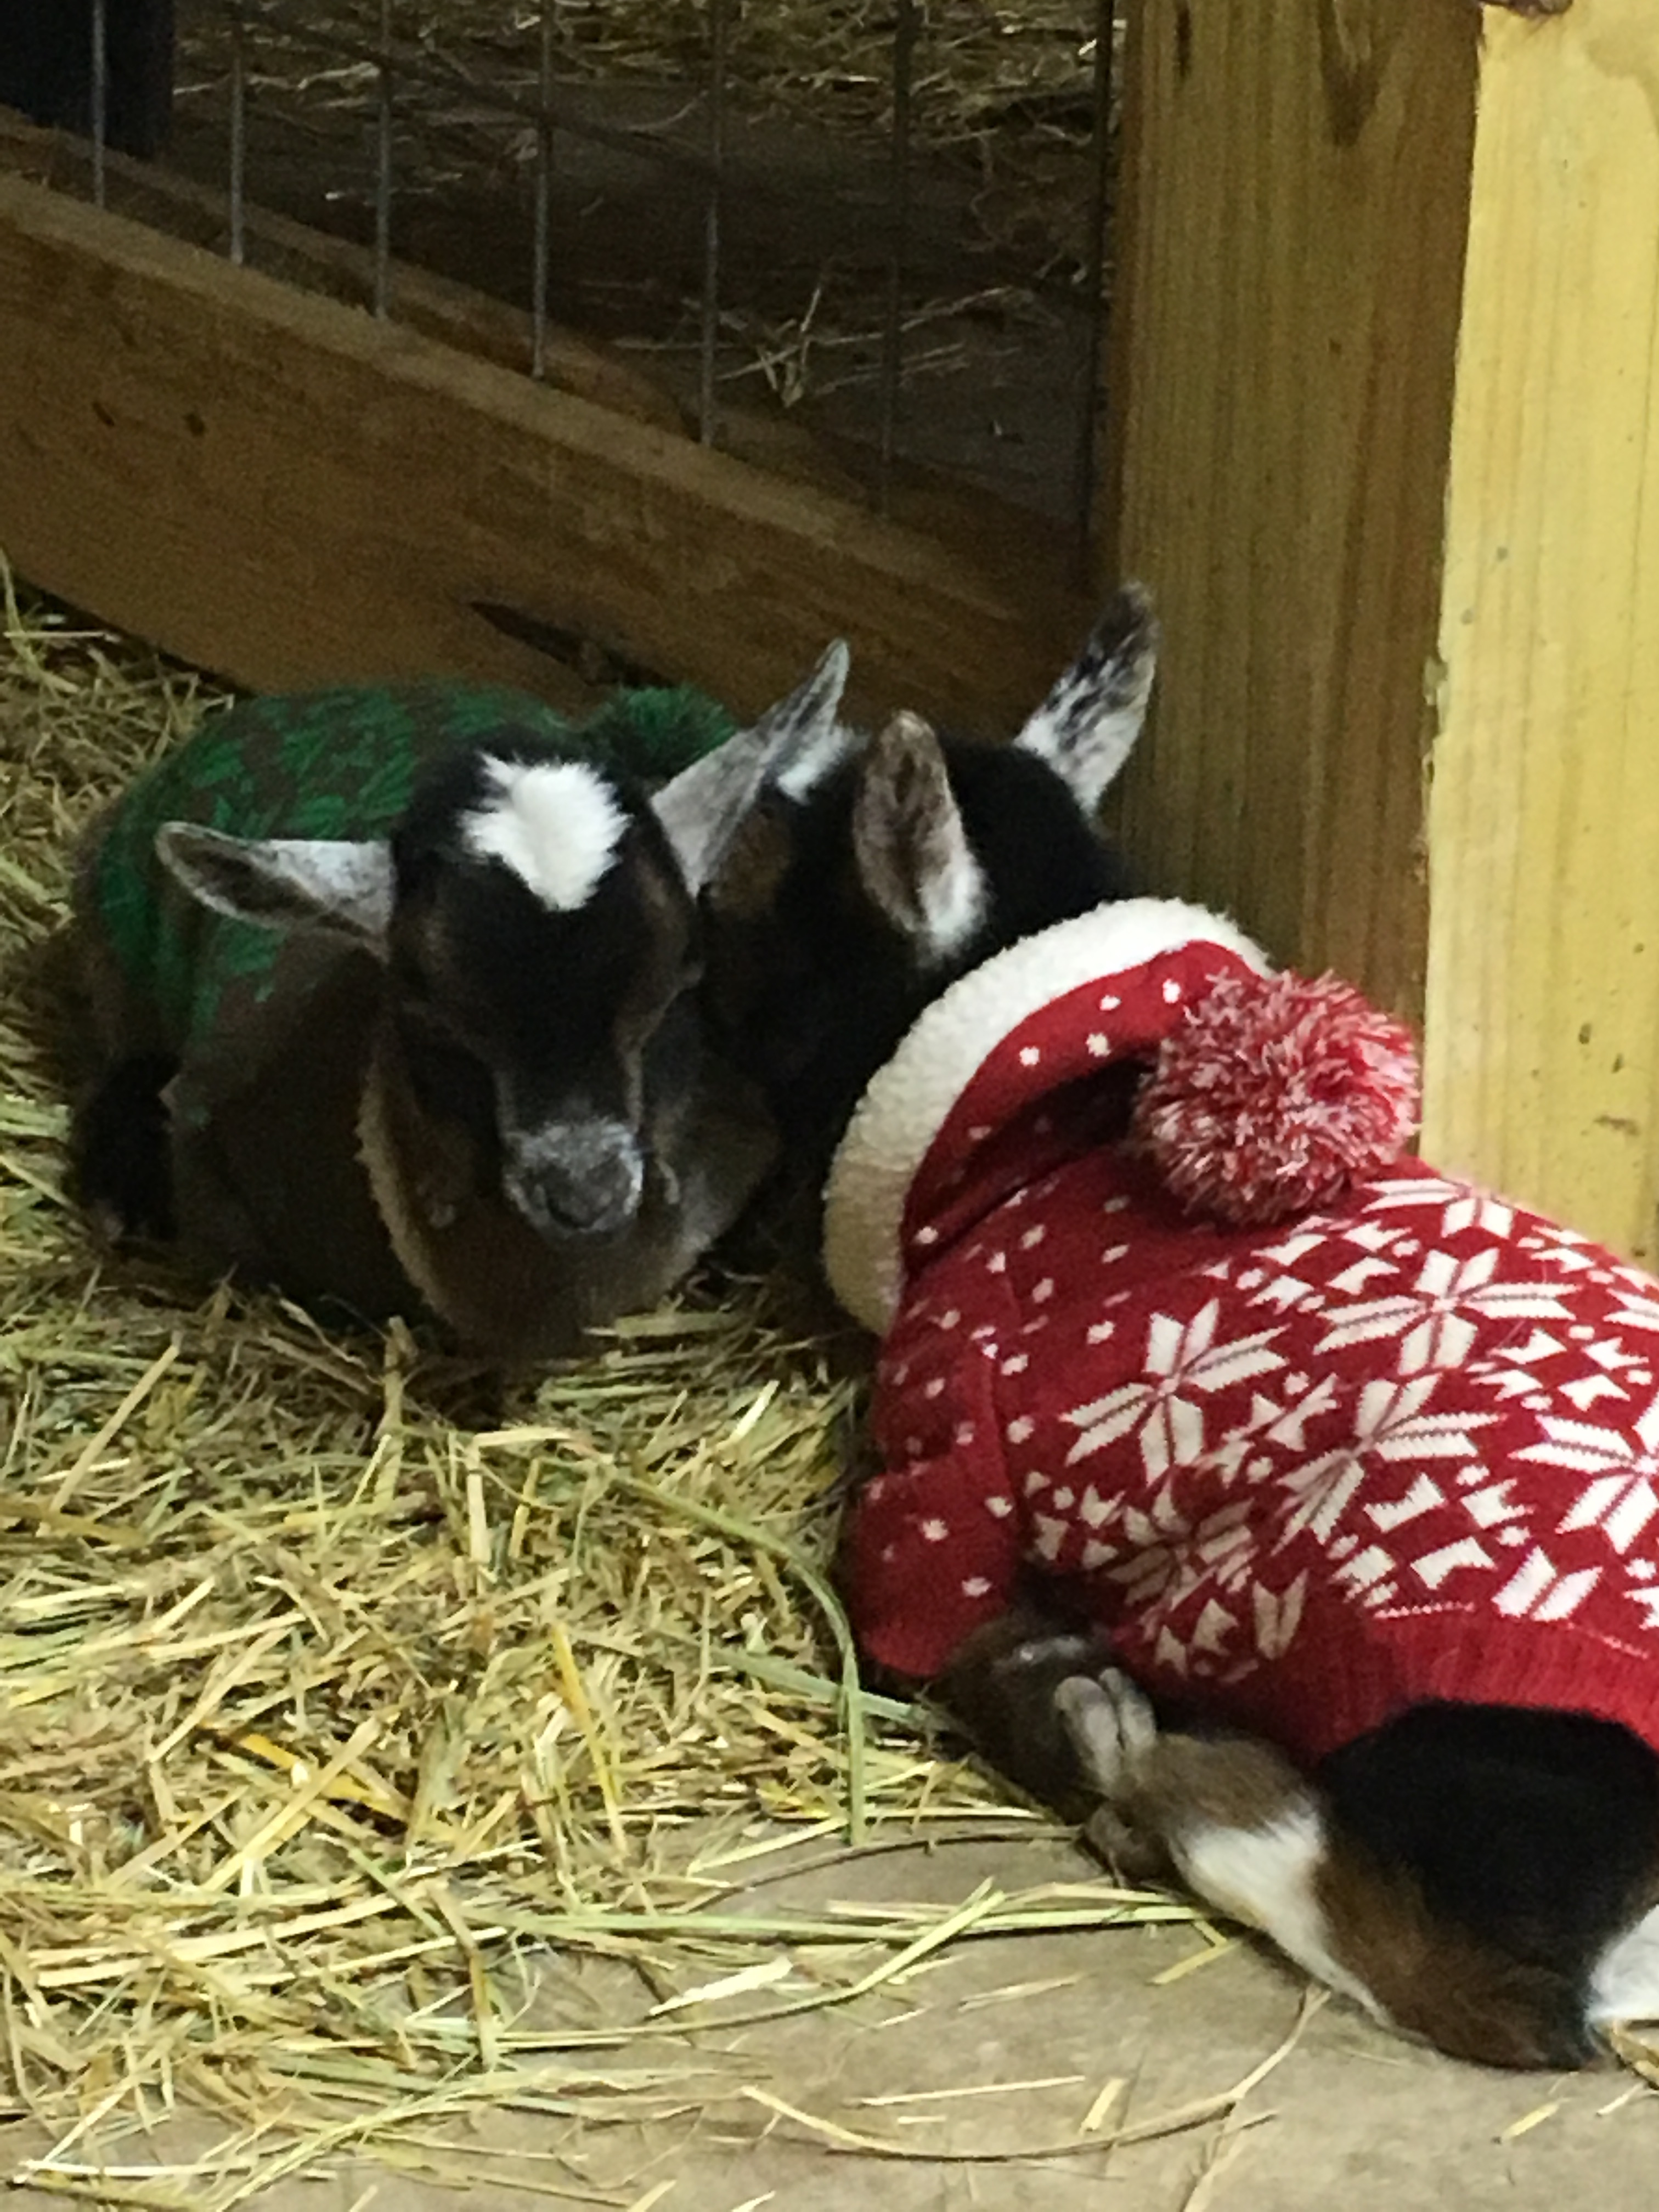 Baby goats cuddle up in sweaters at the Heifer Urban Farm in Little Rock, Ar.